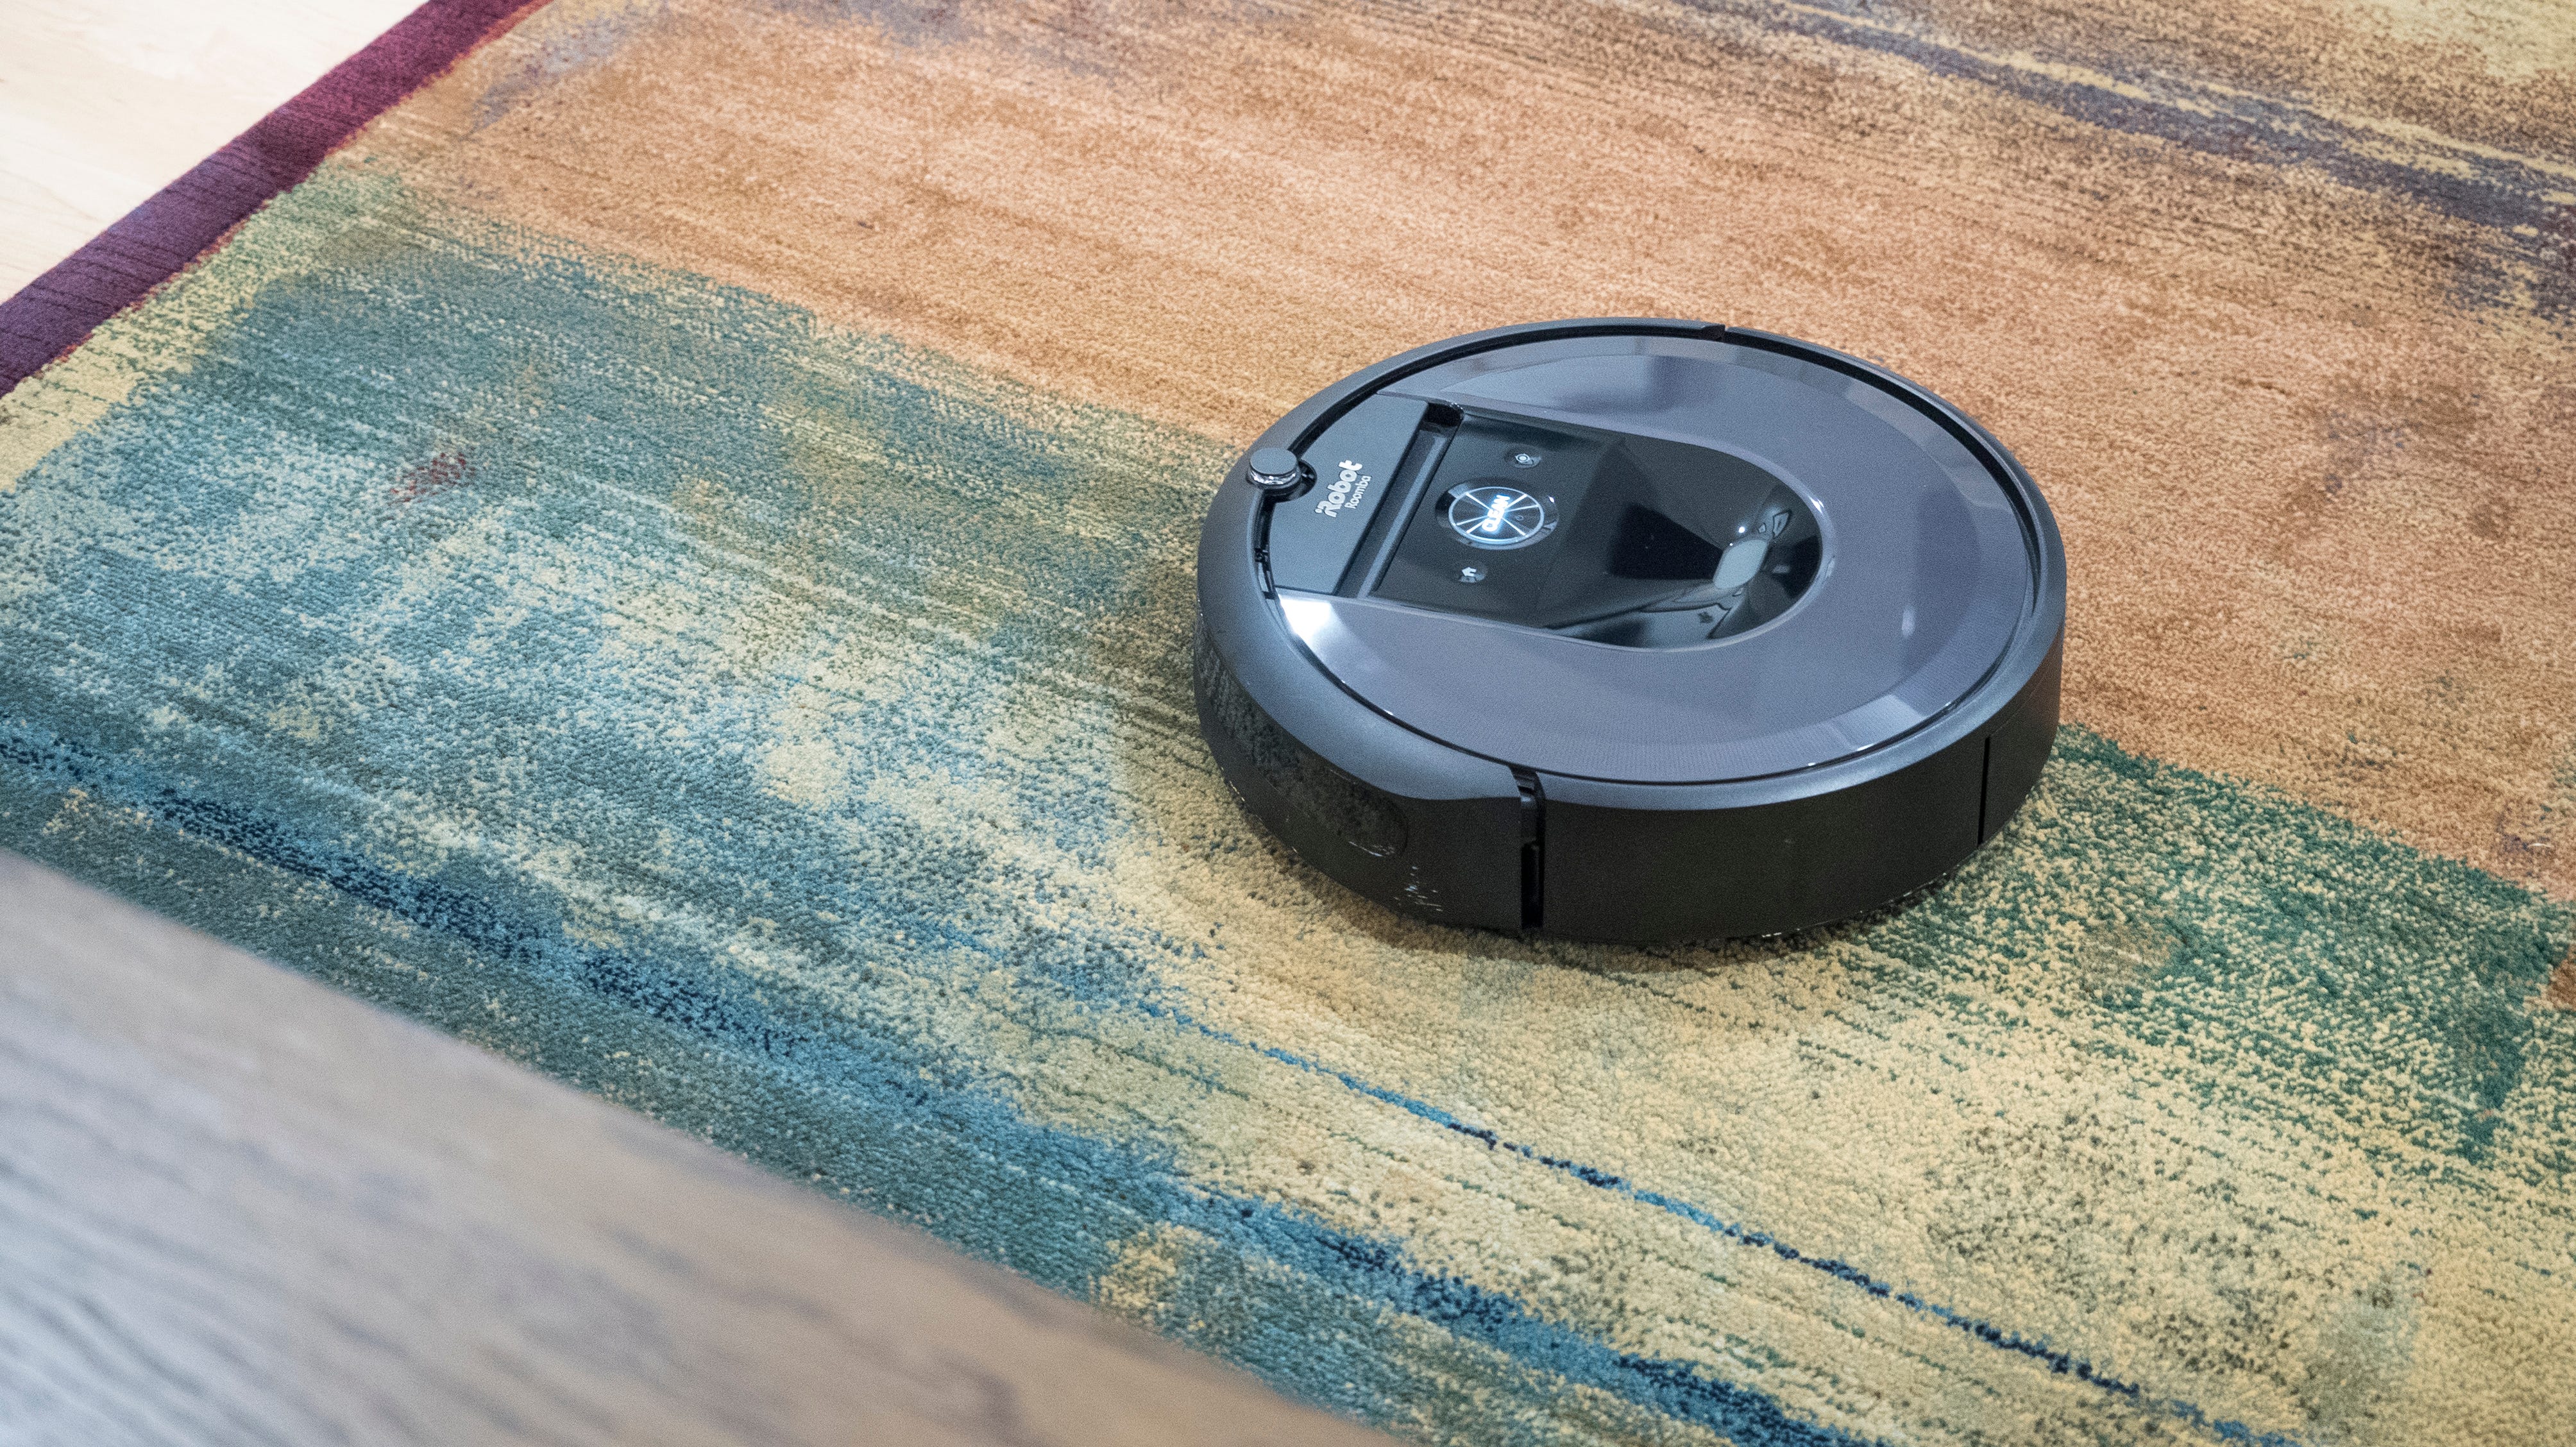 The Best Robot Vacuums For 2019 Irobot, Best Roomba For Hardwood Floors And Carpet